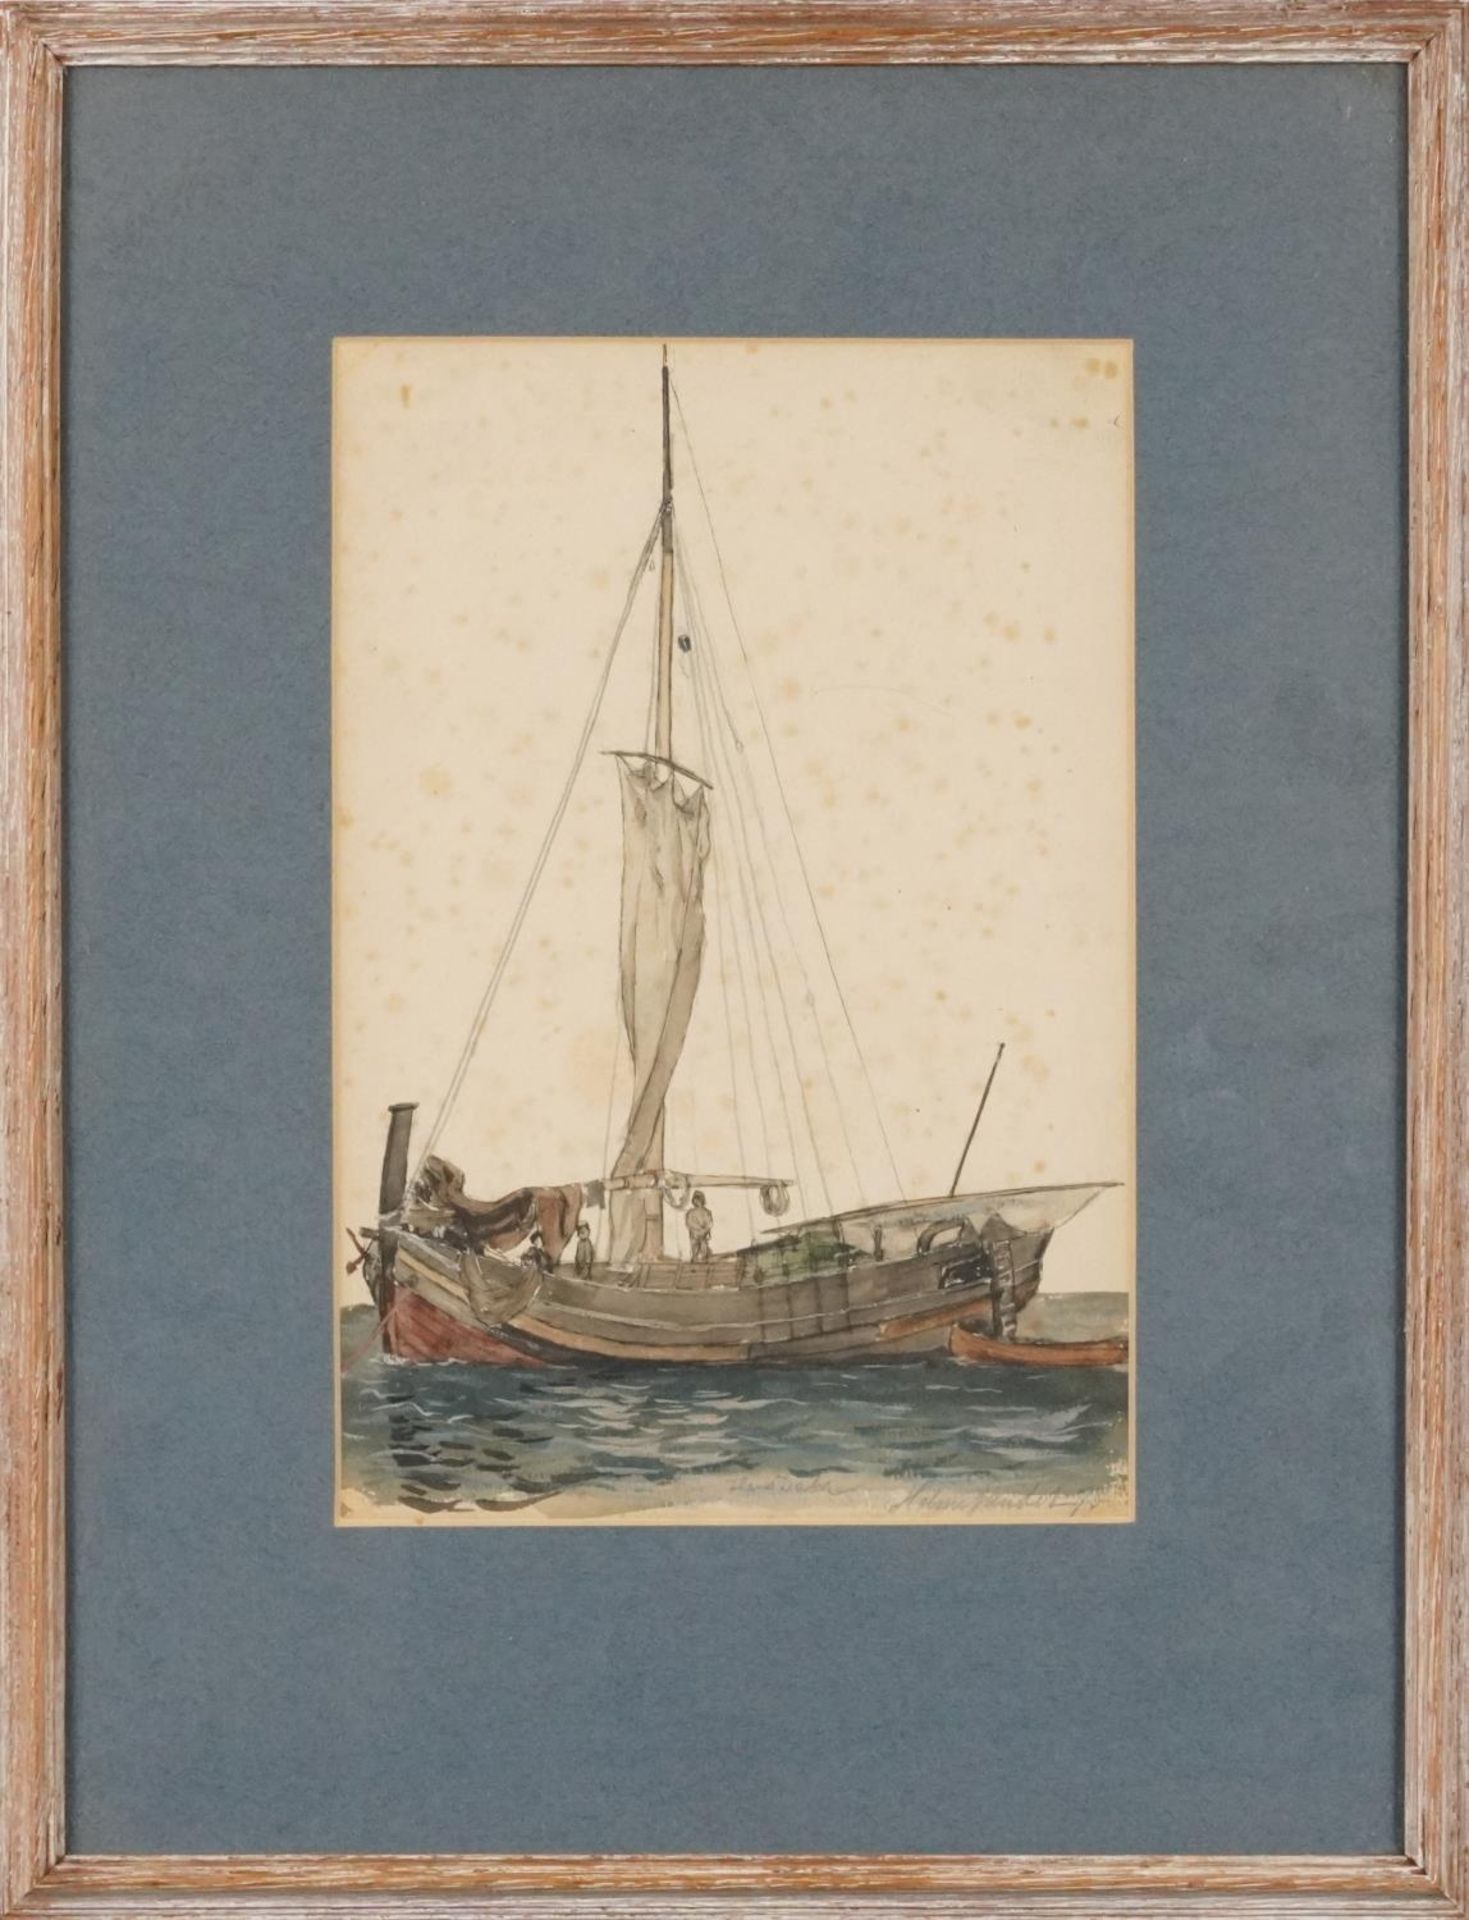 Hans Dahl 1873 - Fishing boat, late 19th century Norwegian school pencil and watercolour, mounted, - Image 2 of 5